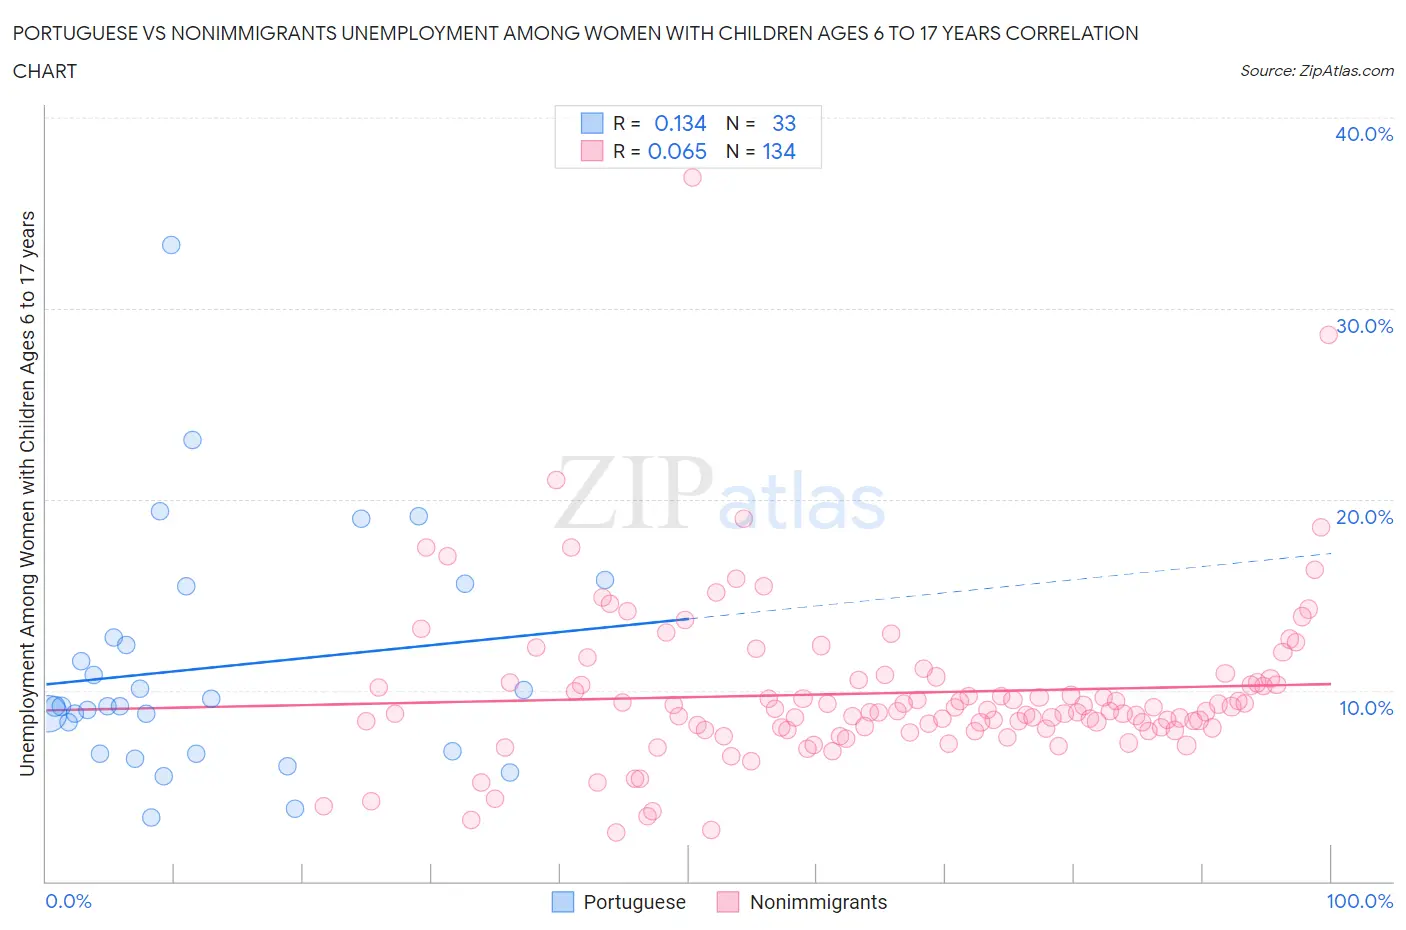 Portuguese vs Nonimmigrants Unemployment Among Women with Children Ages 6 to 17 years